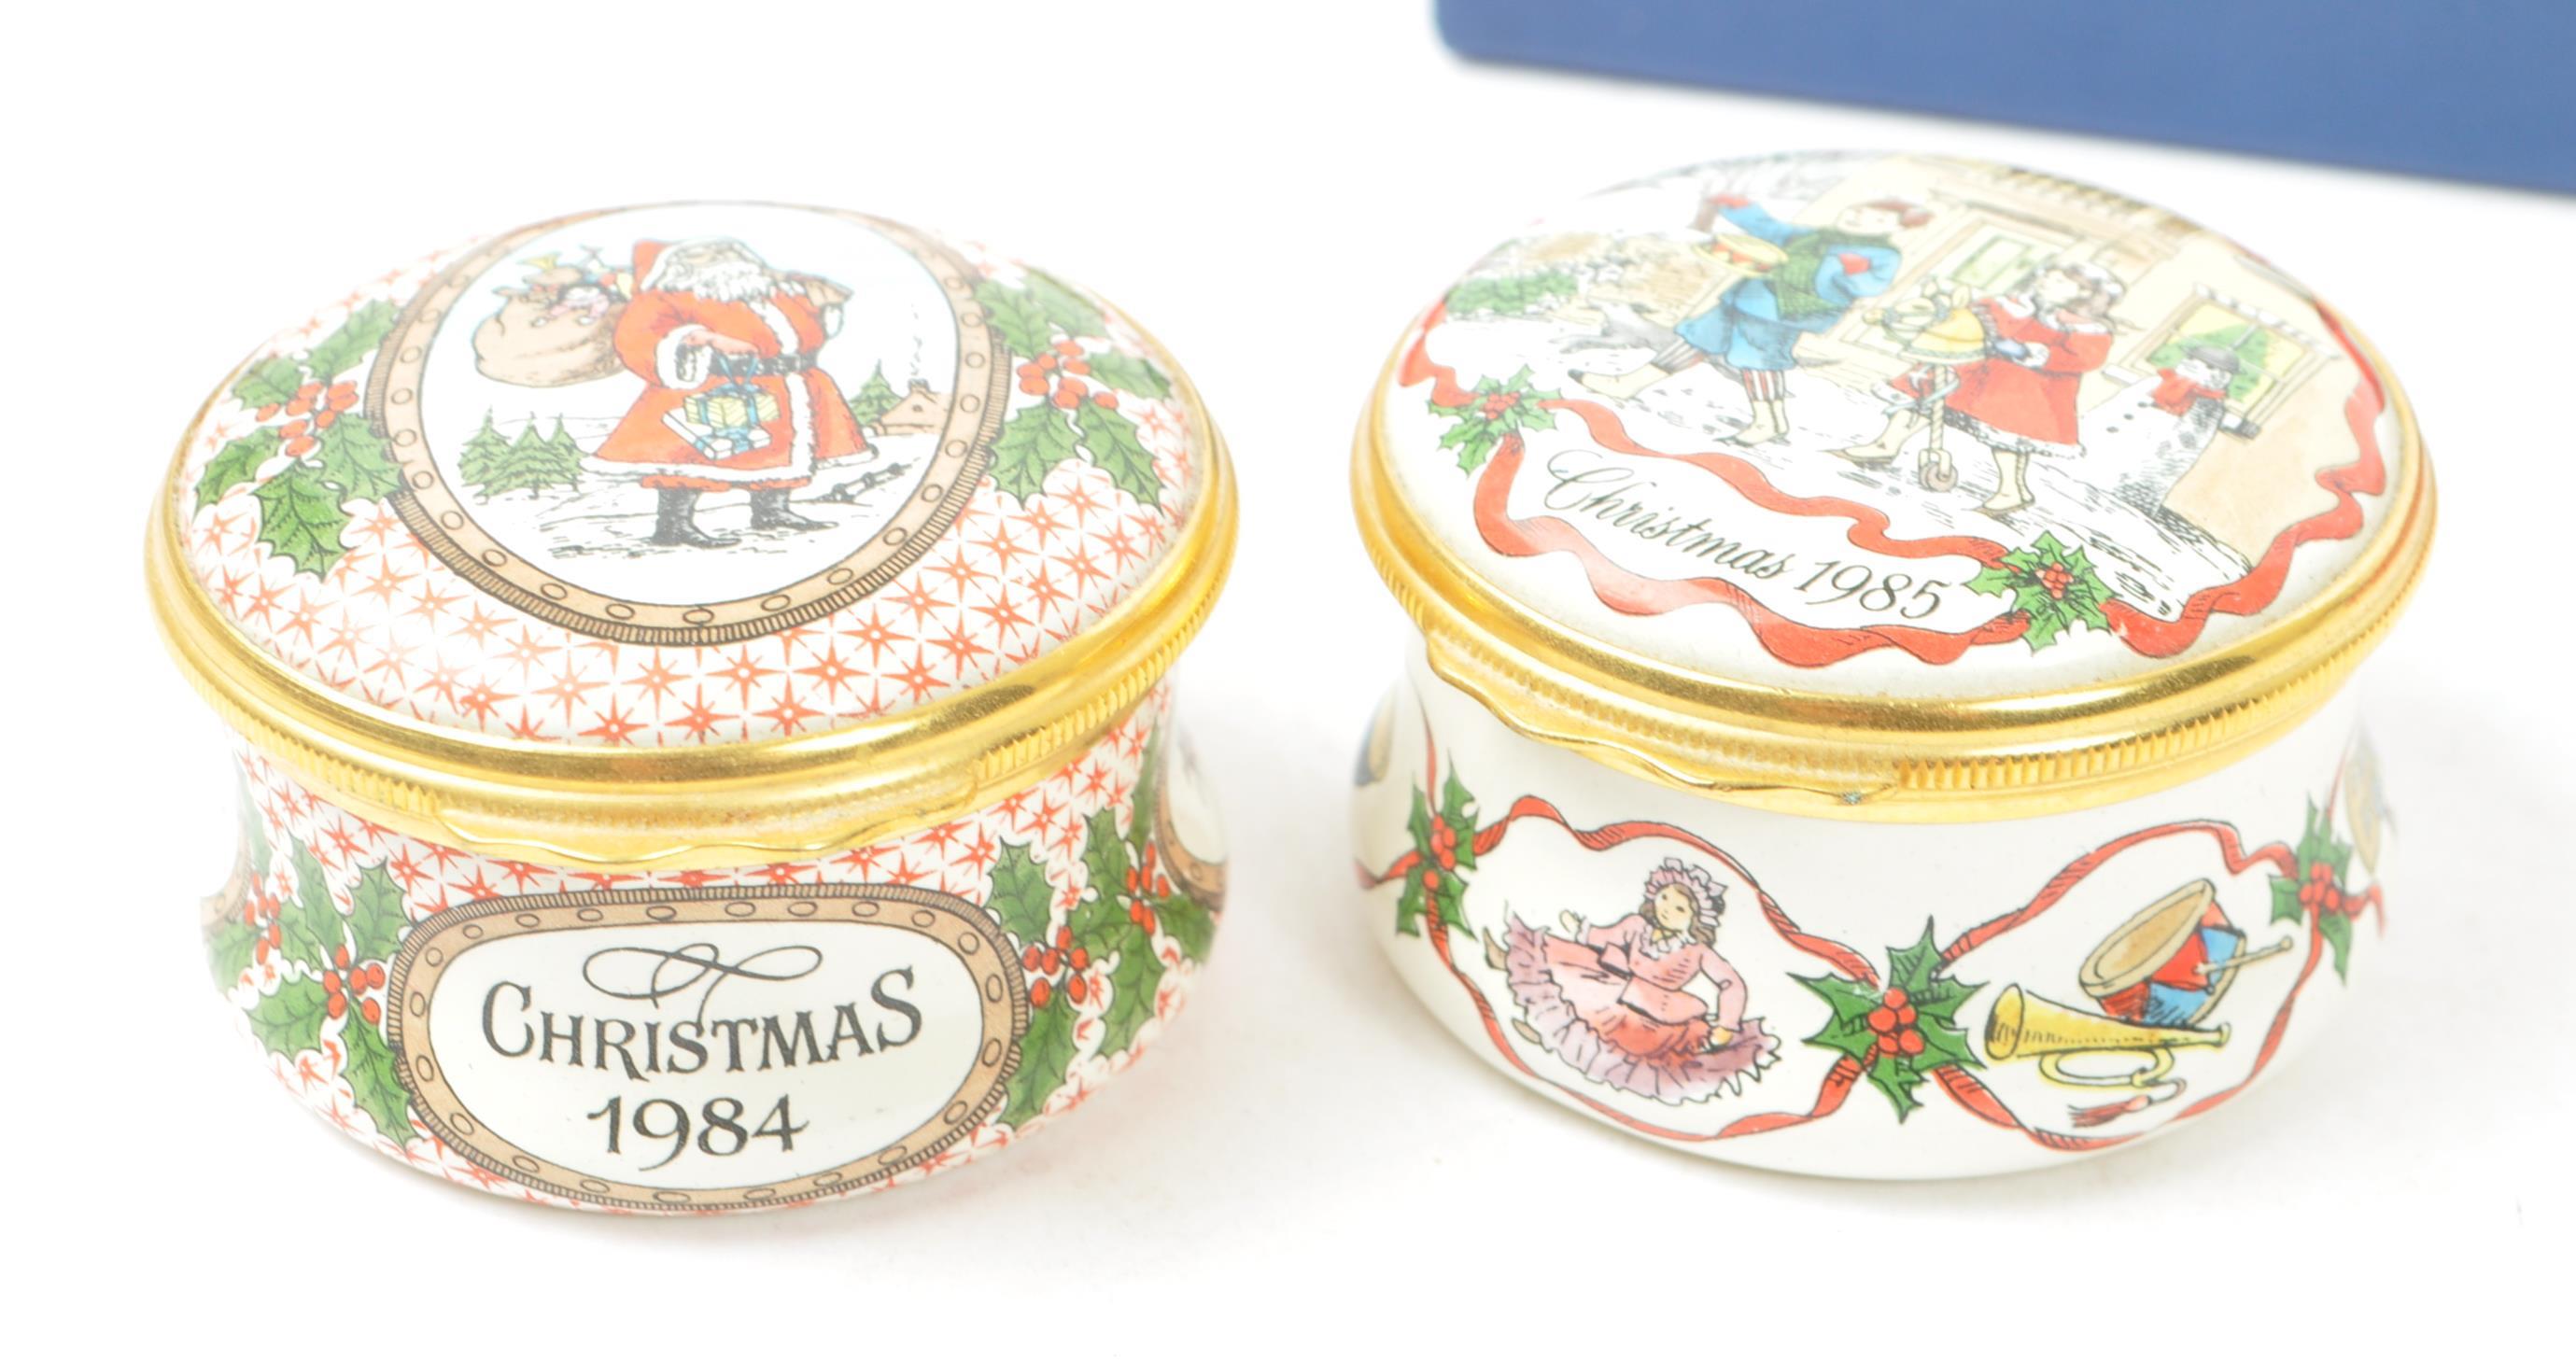 HALCYON DAYS ENAMELS - COLLECTION OF 1980S ENAMEL BOXES - Image 3 of 6